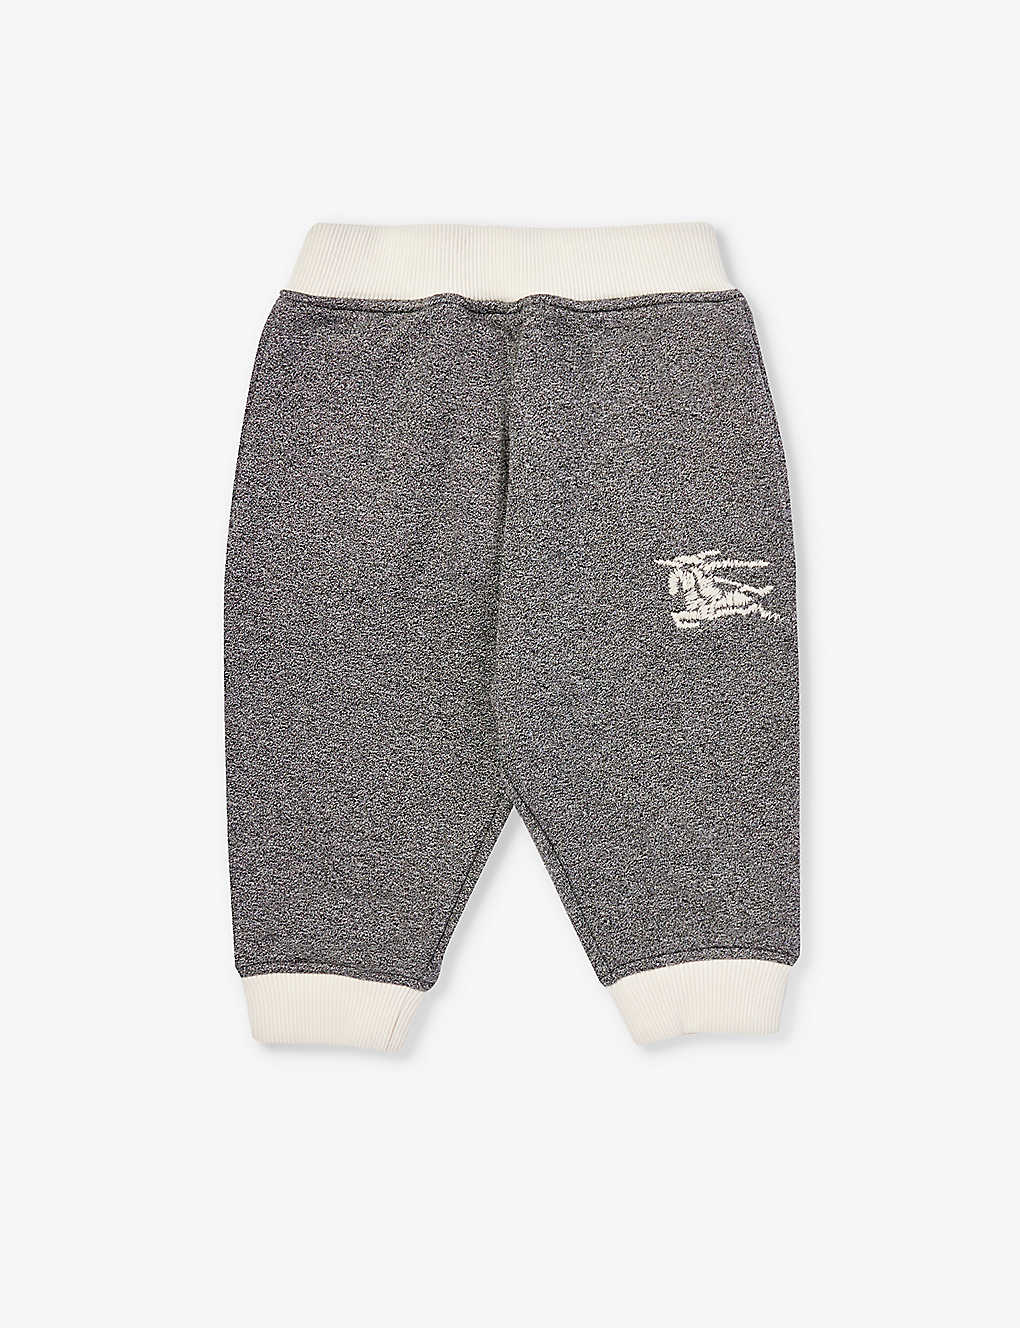 Burberry Babies' Brand-embroidered Cotton-jersey Jogging Bottoms 12 Months - In Charcoal Grey Melang